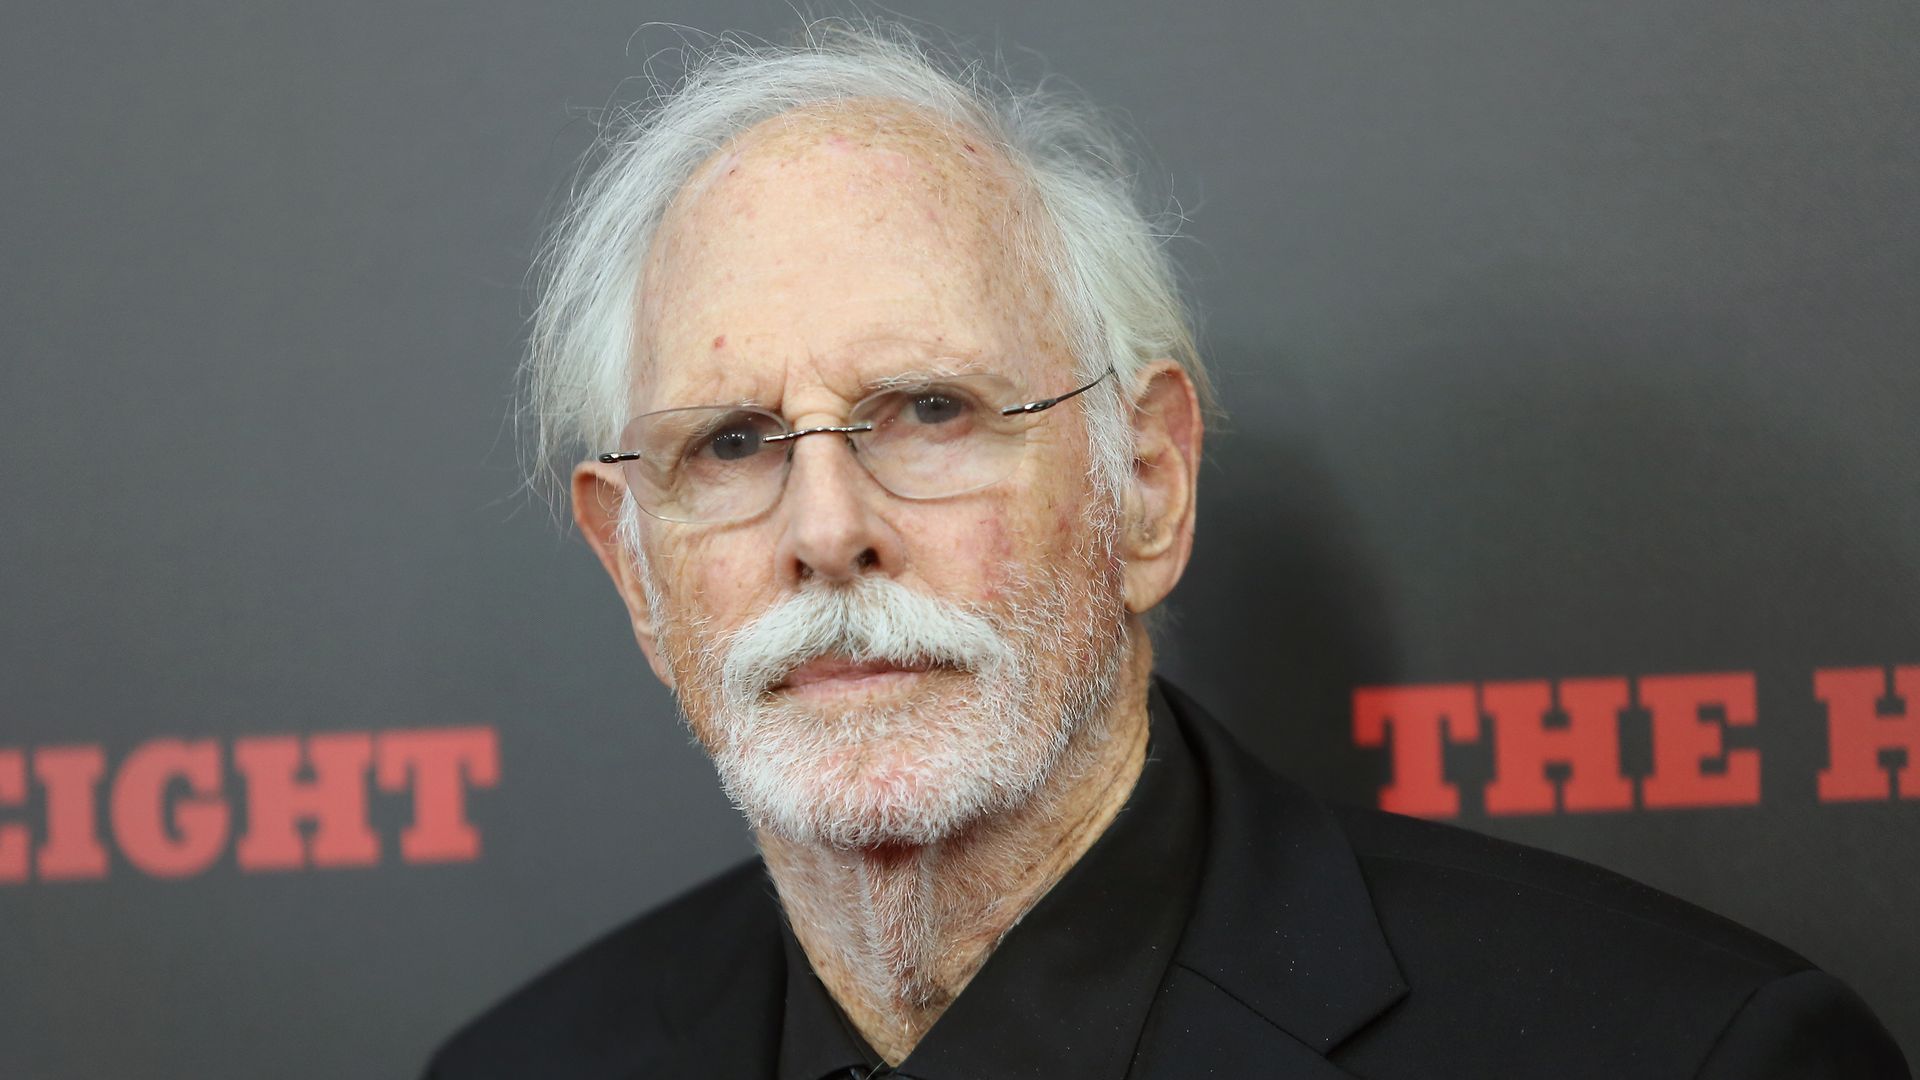 Actor Bruce Dern attends the The New York Premiere Of "The Hateful Eight" on December 14, 2015 in New York City